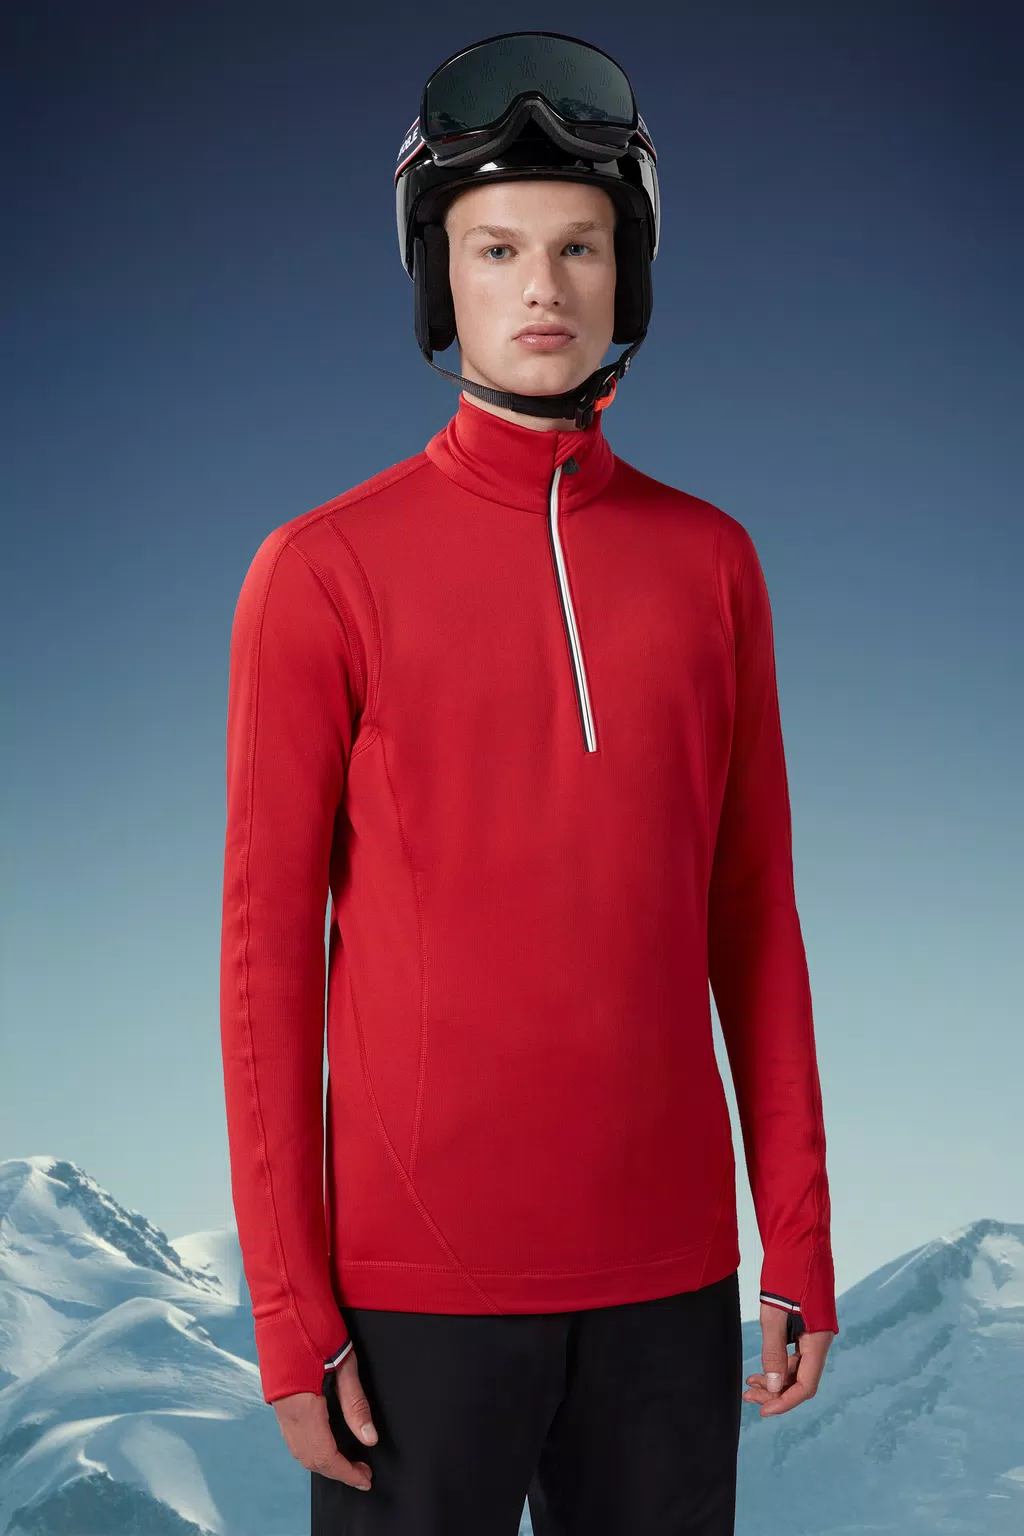 Dolcevita in Base Layer Uomo Rosso Fuoco Moncler 1